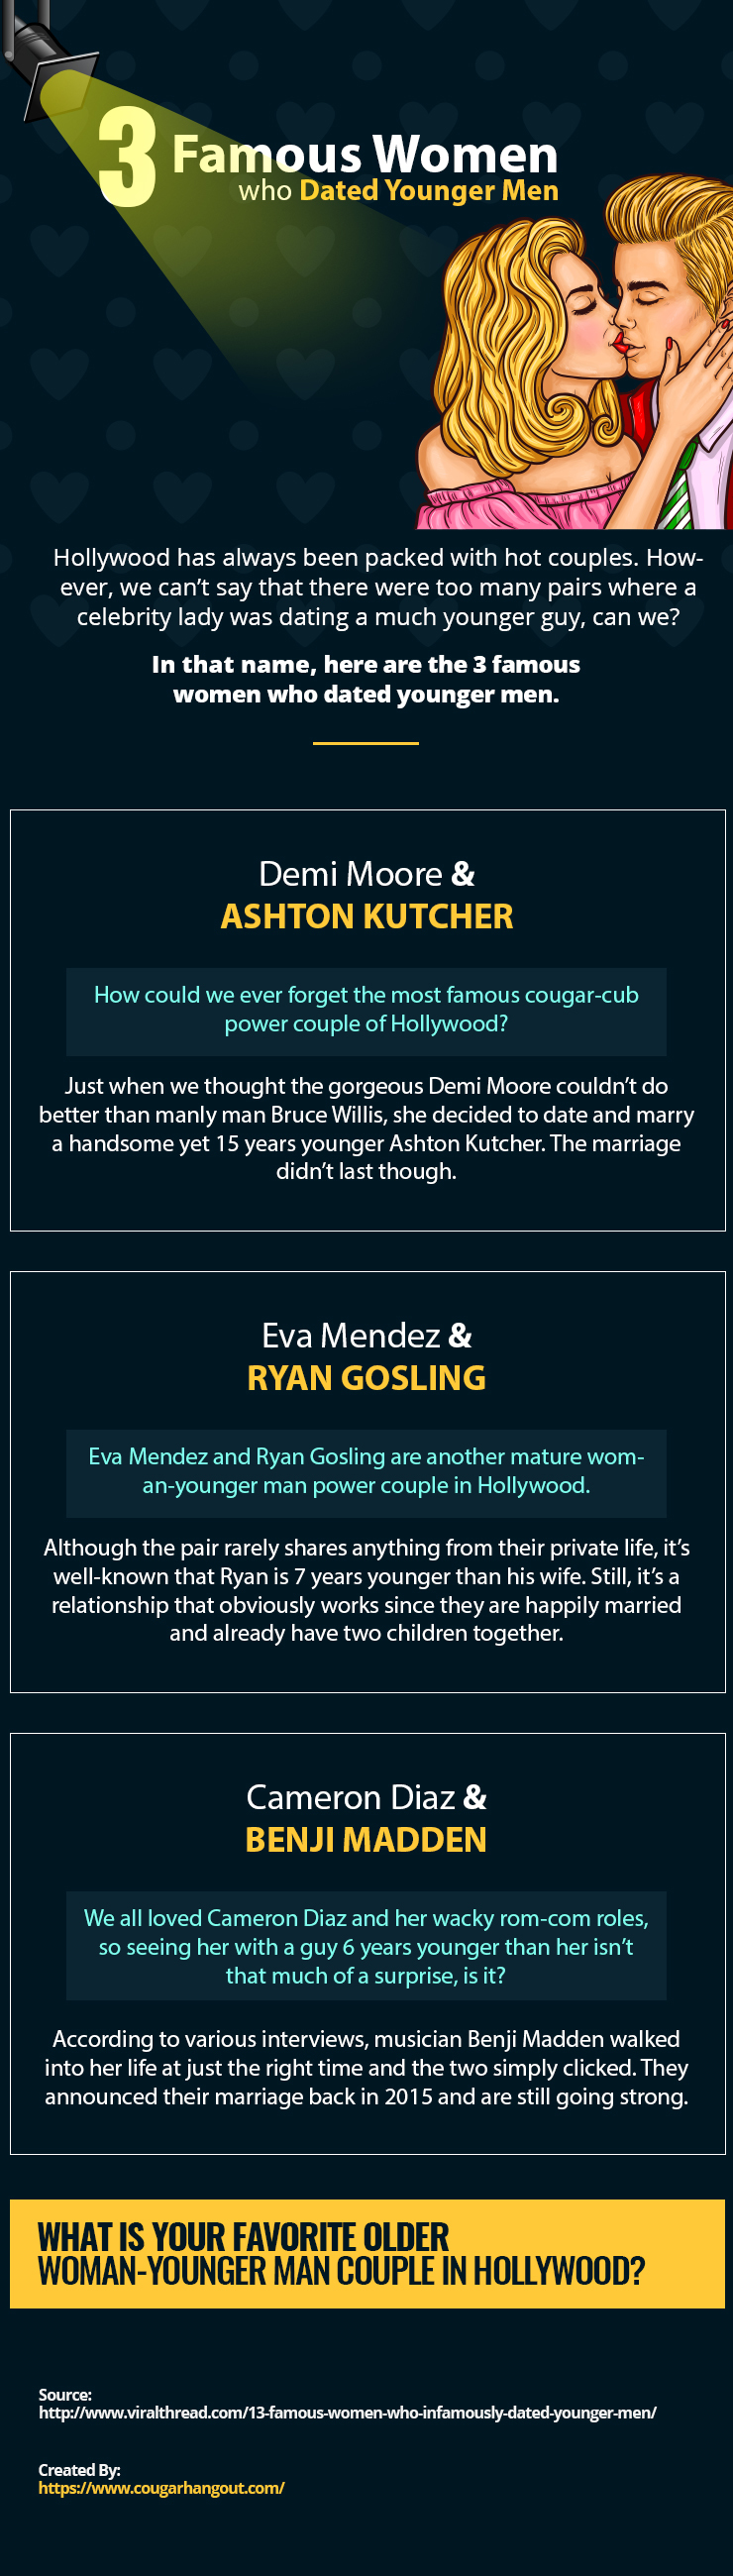 3 Famous Women who Dated Younger Men